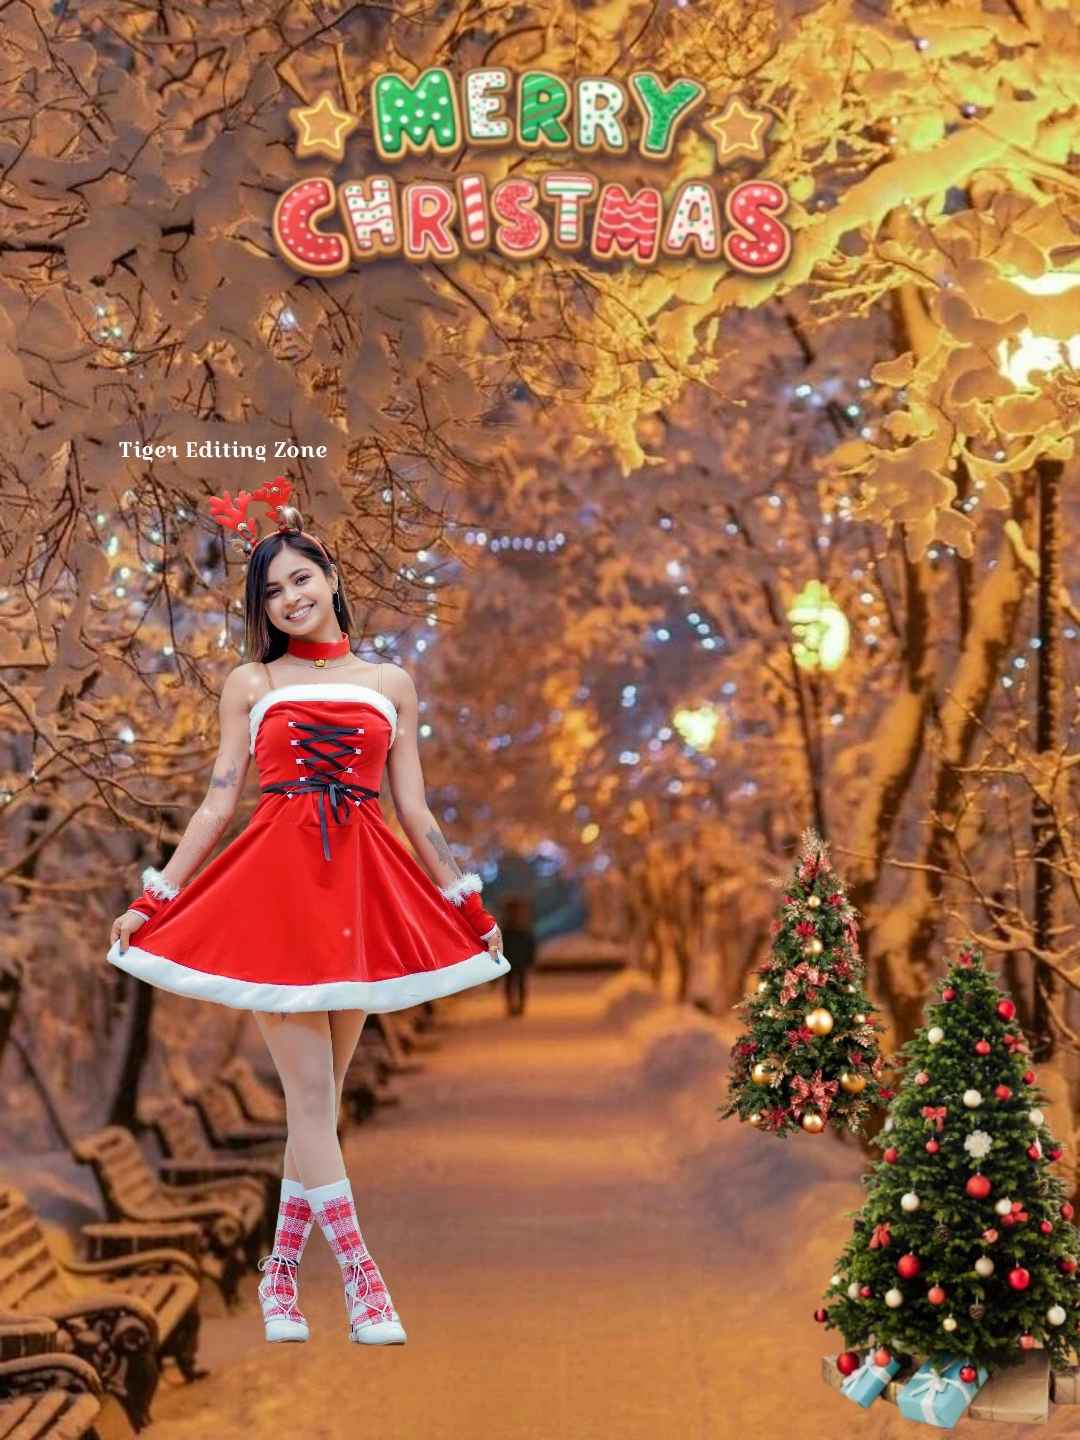 Merry Christmas Background Full HD For Cb PicsArt Editing With Girl